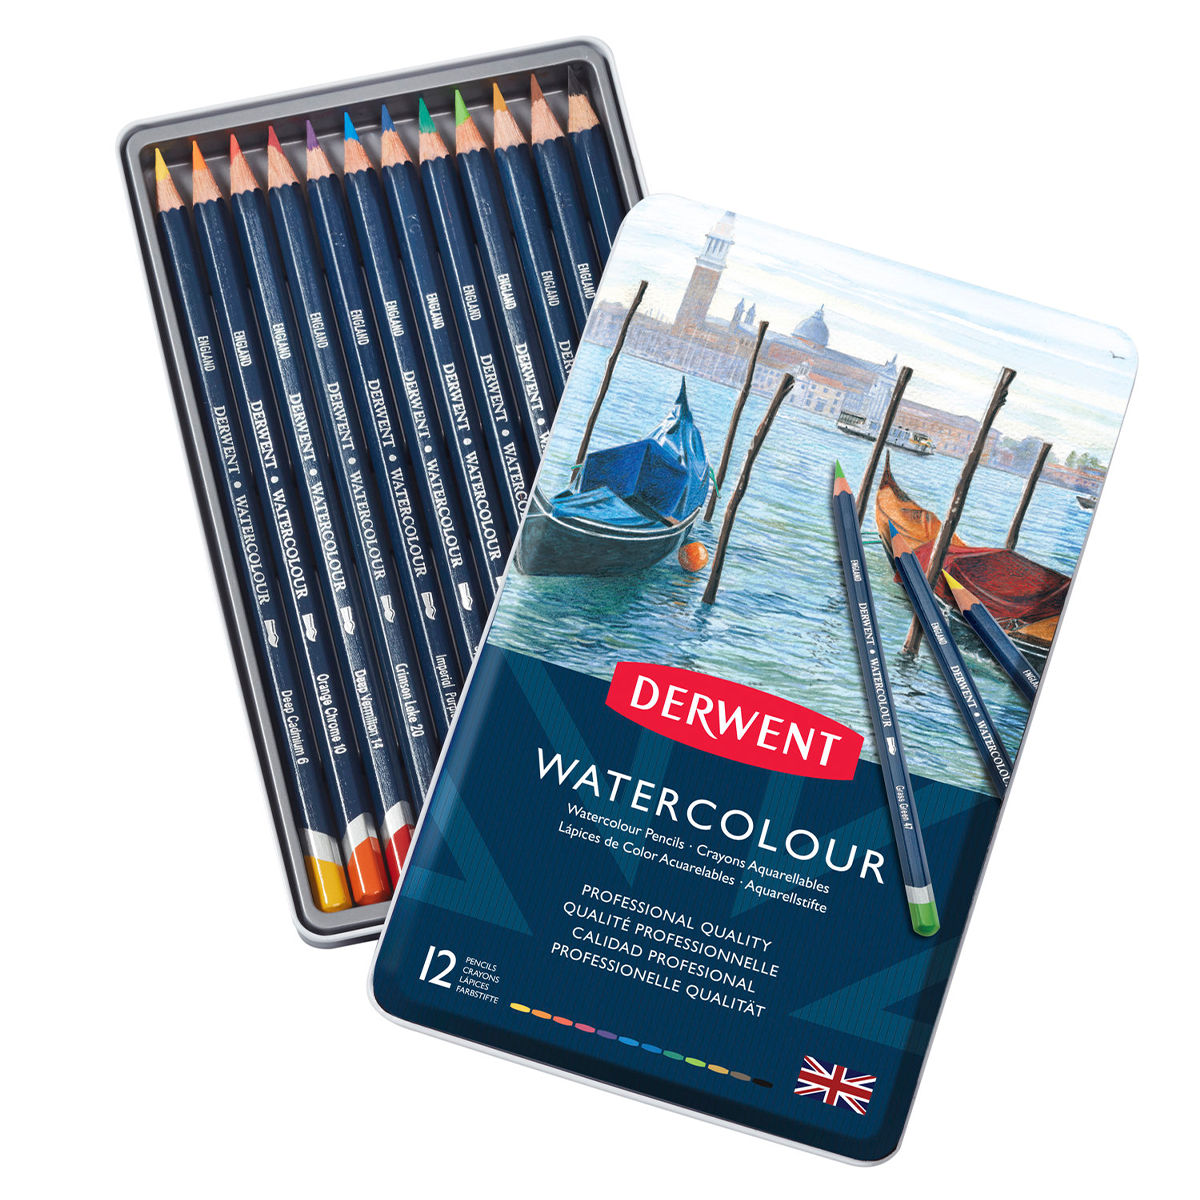 Watercolor Pencils Professional, Artist Quality. New Sealed. 24